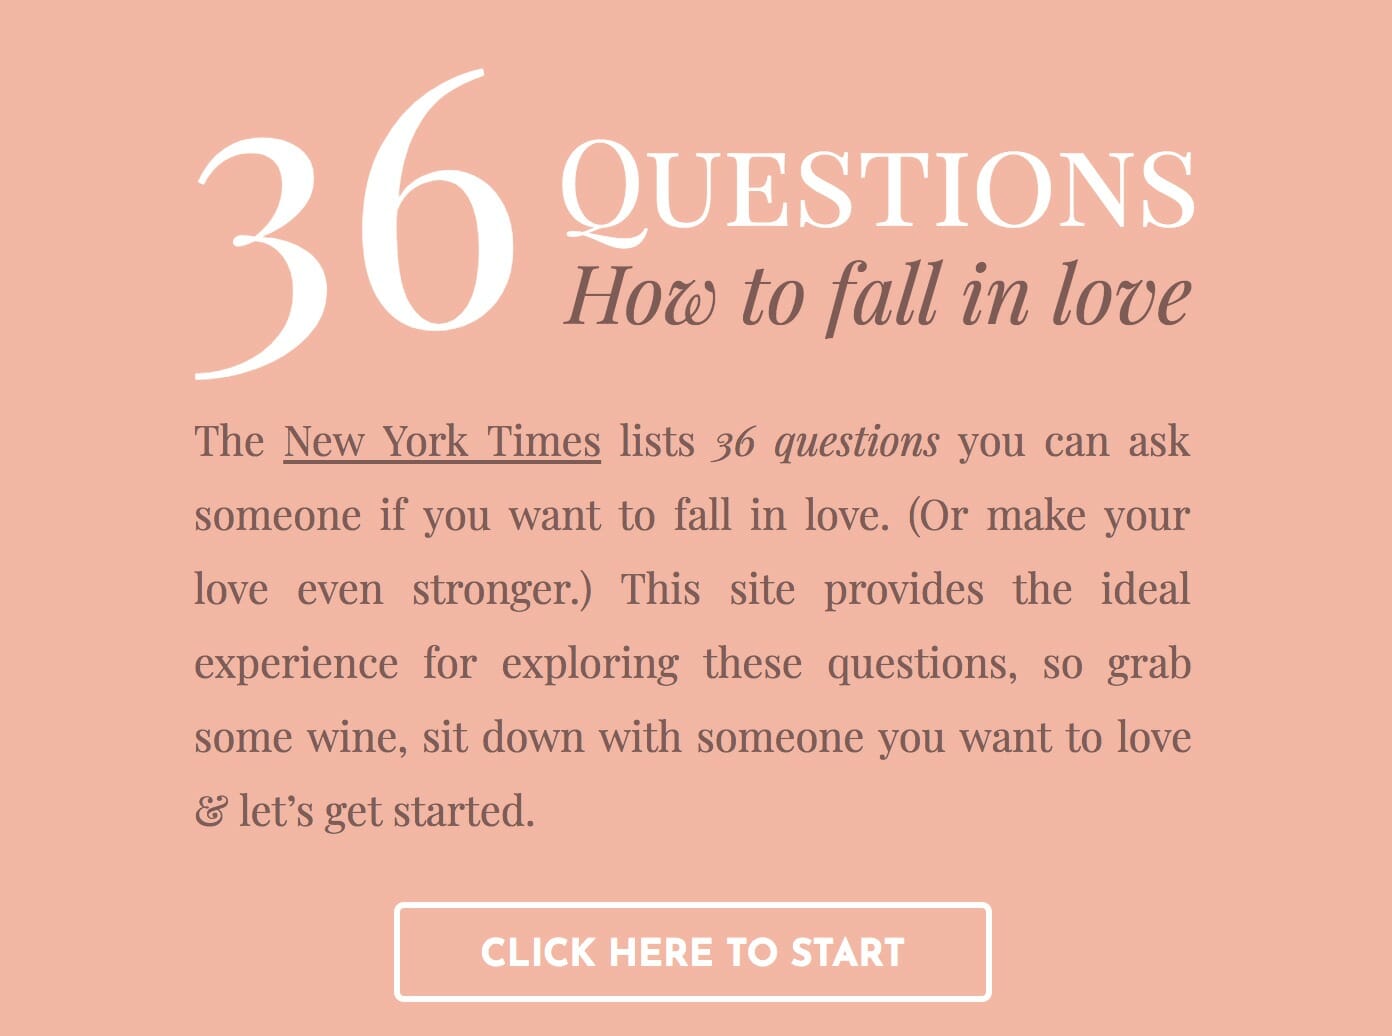 36 questions to fall in love pdf